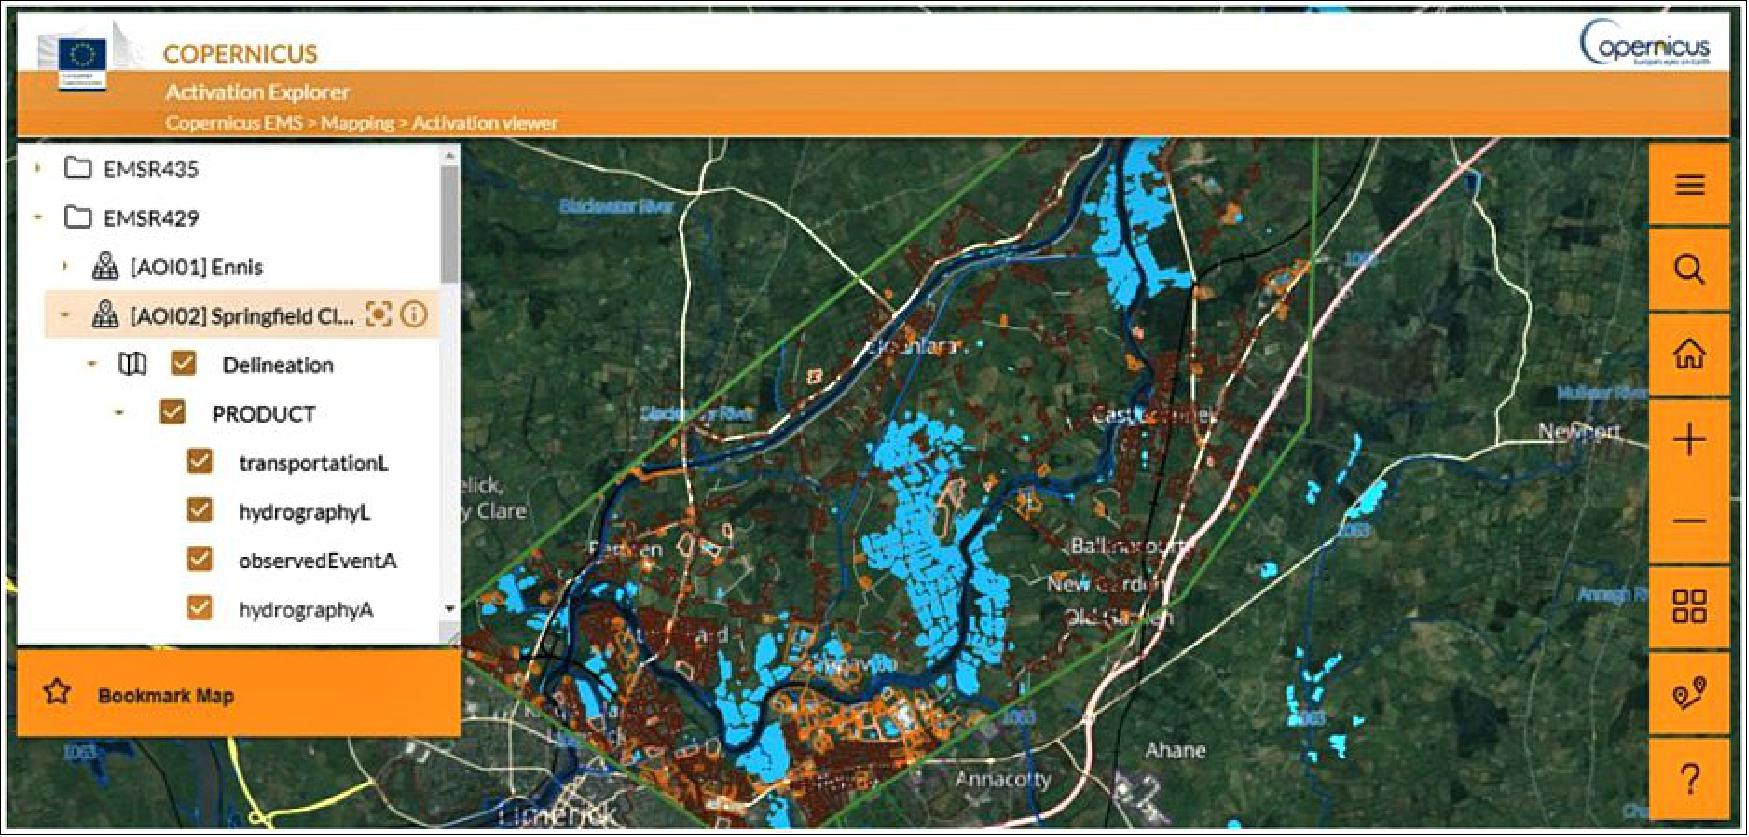 Figure 6: The service connects decision-makers with the critical geoinformation they need, empowering them to assess situations with more clarity and make educated decisions (image credit: Copernicus EMS)